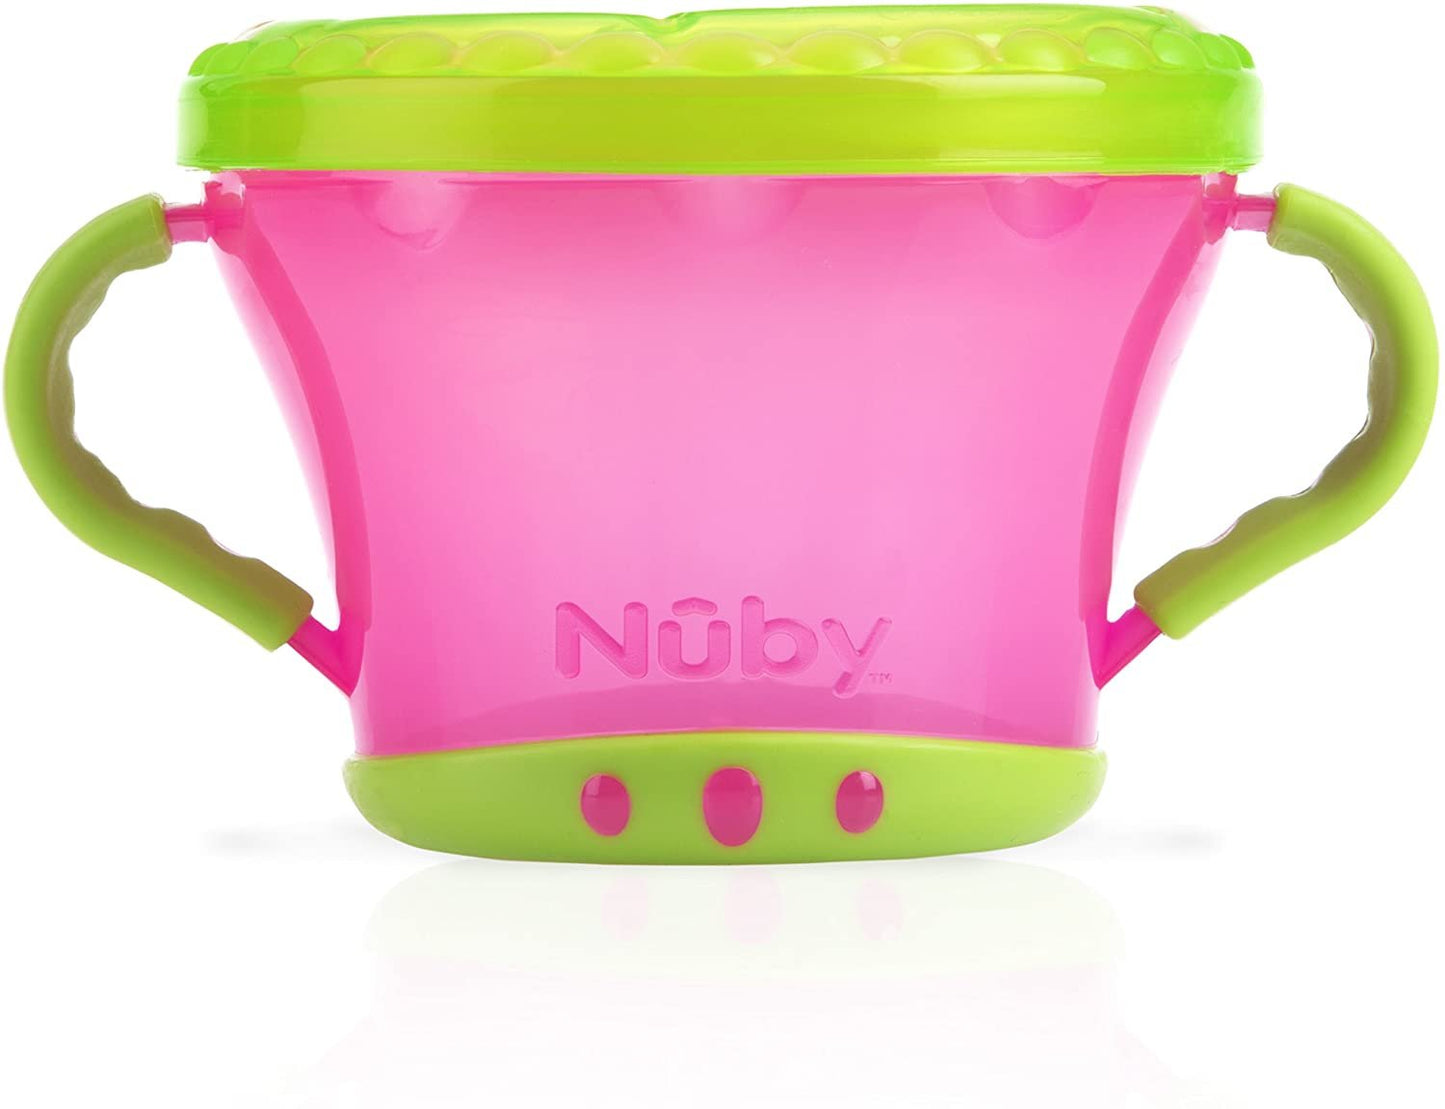 Nuby Snack Keeper, Colors May Vary, 5"